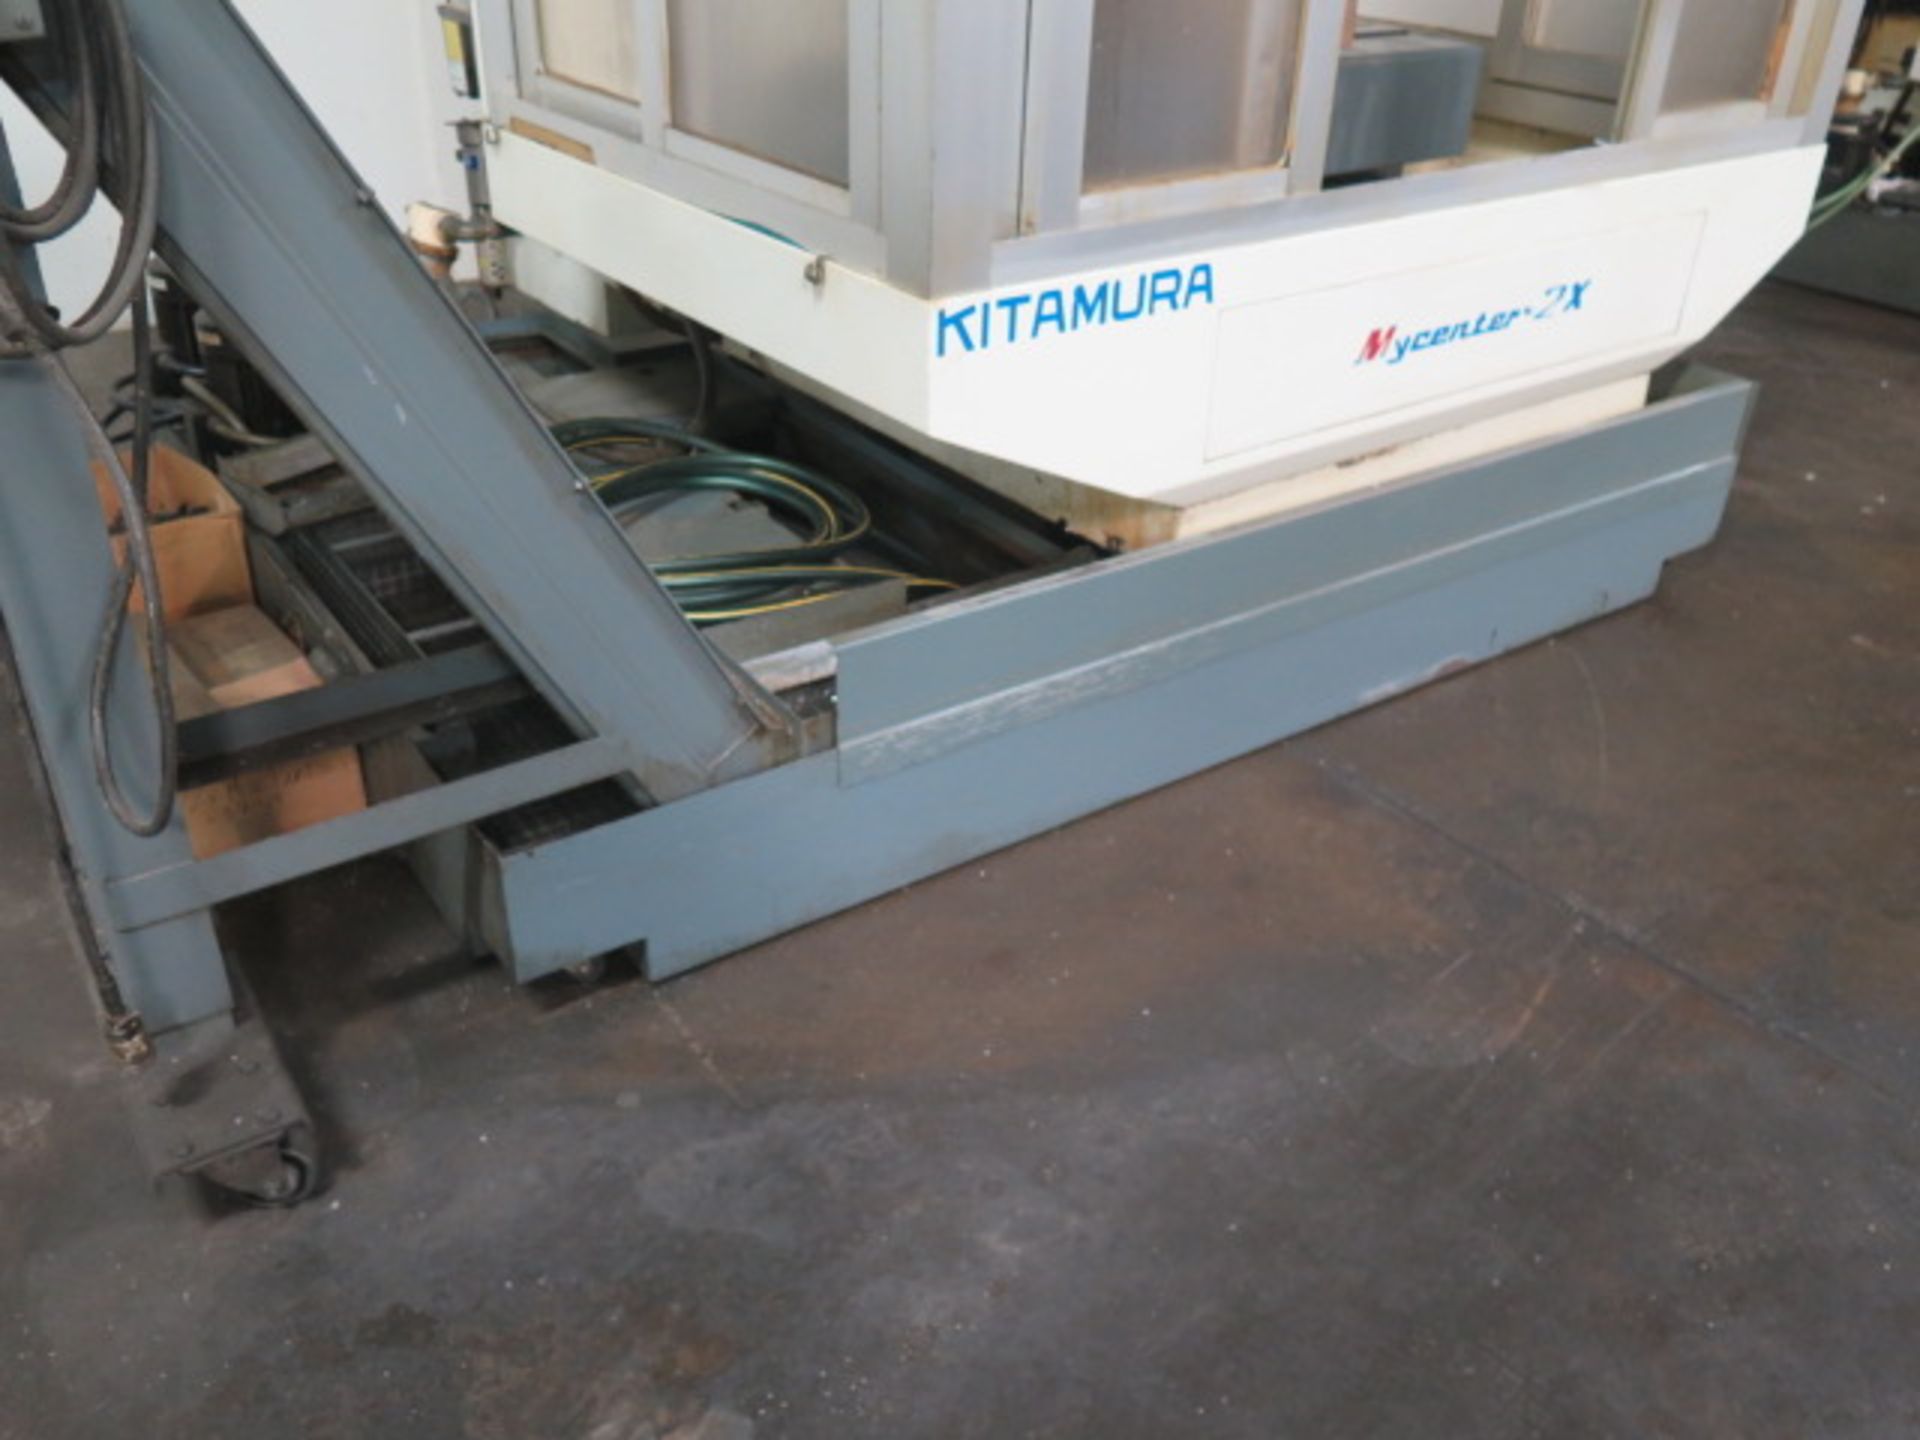 1998 Kitamura Mycenter-2X CNC VMC s/n 07120 w/ Yasnac i80 Controls, 20-Station, SOLD AS IS - Image 18 of 23